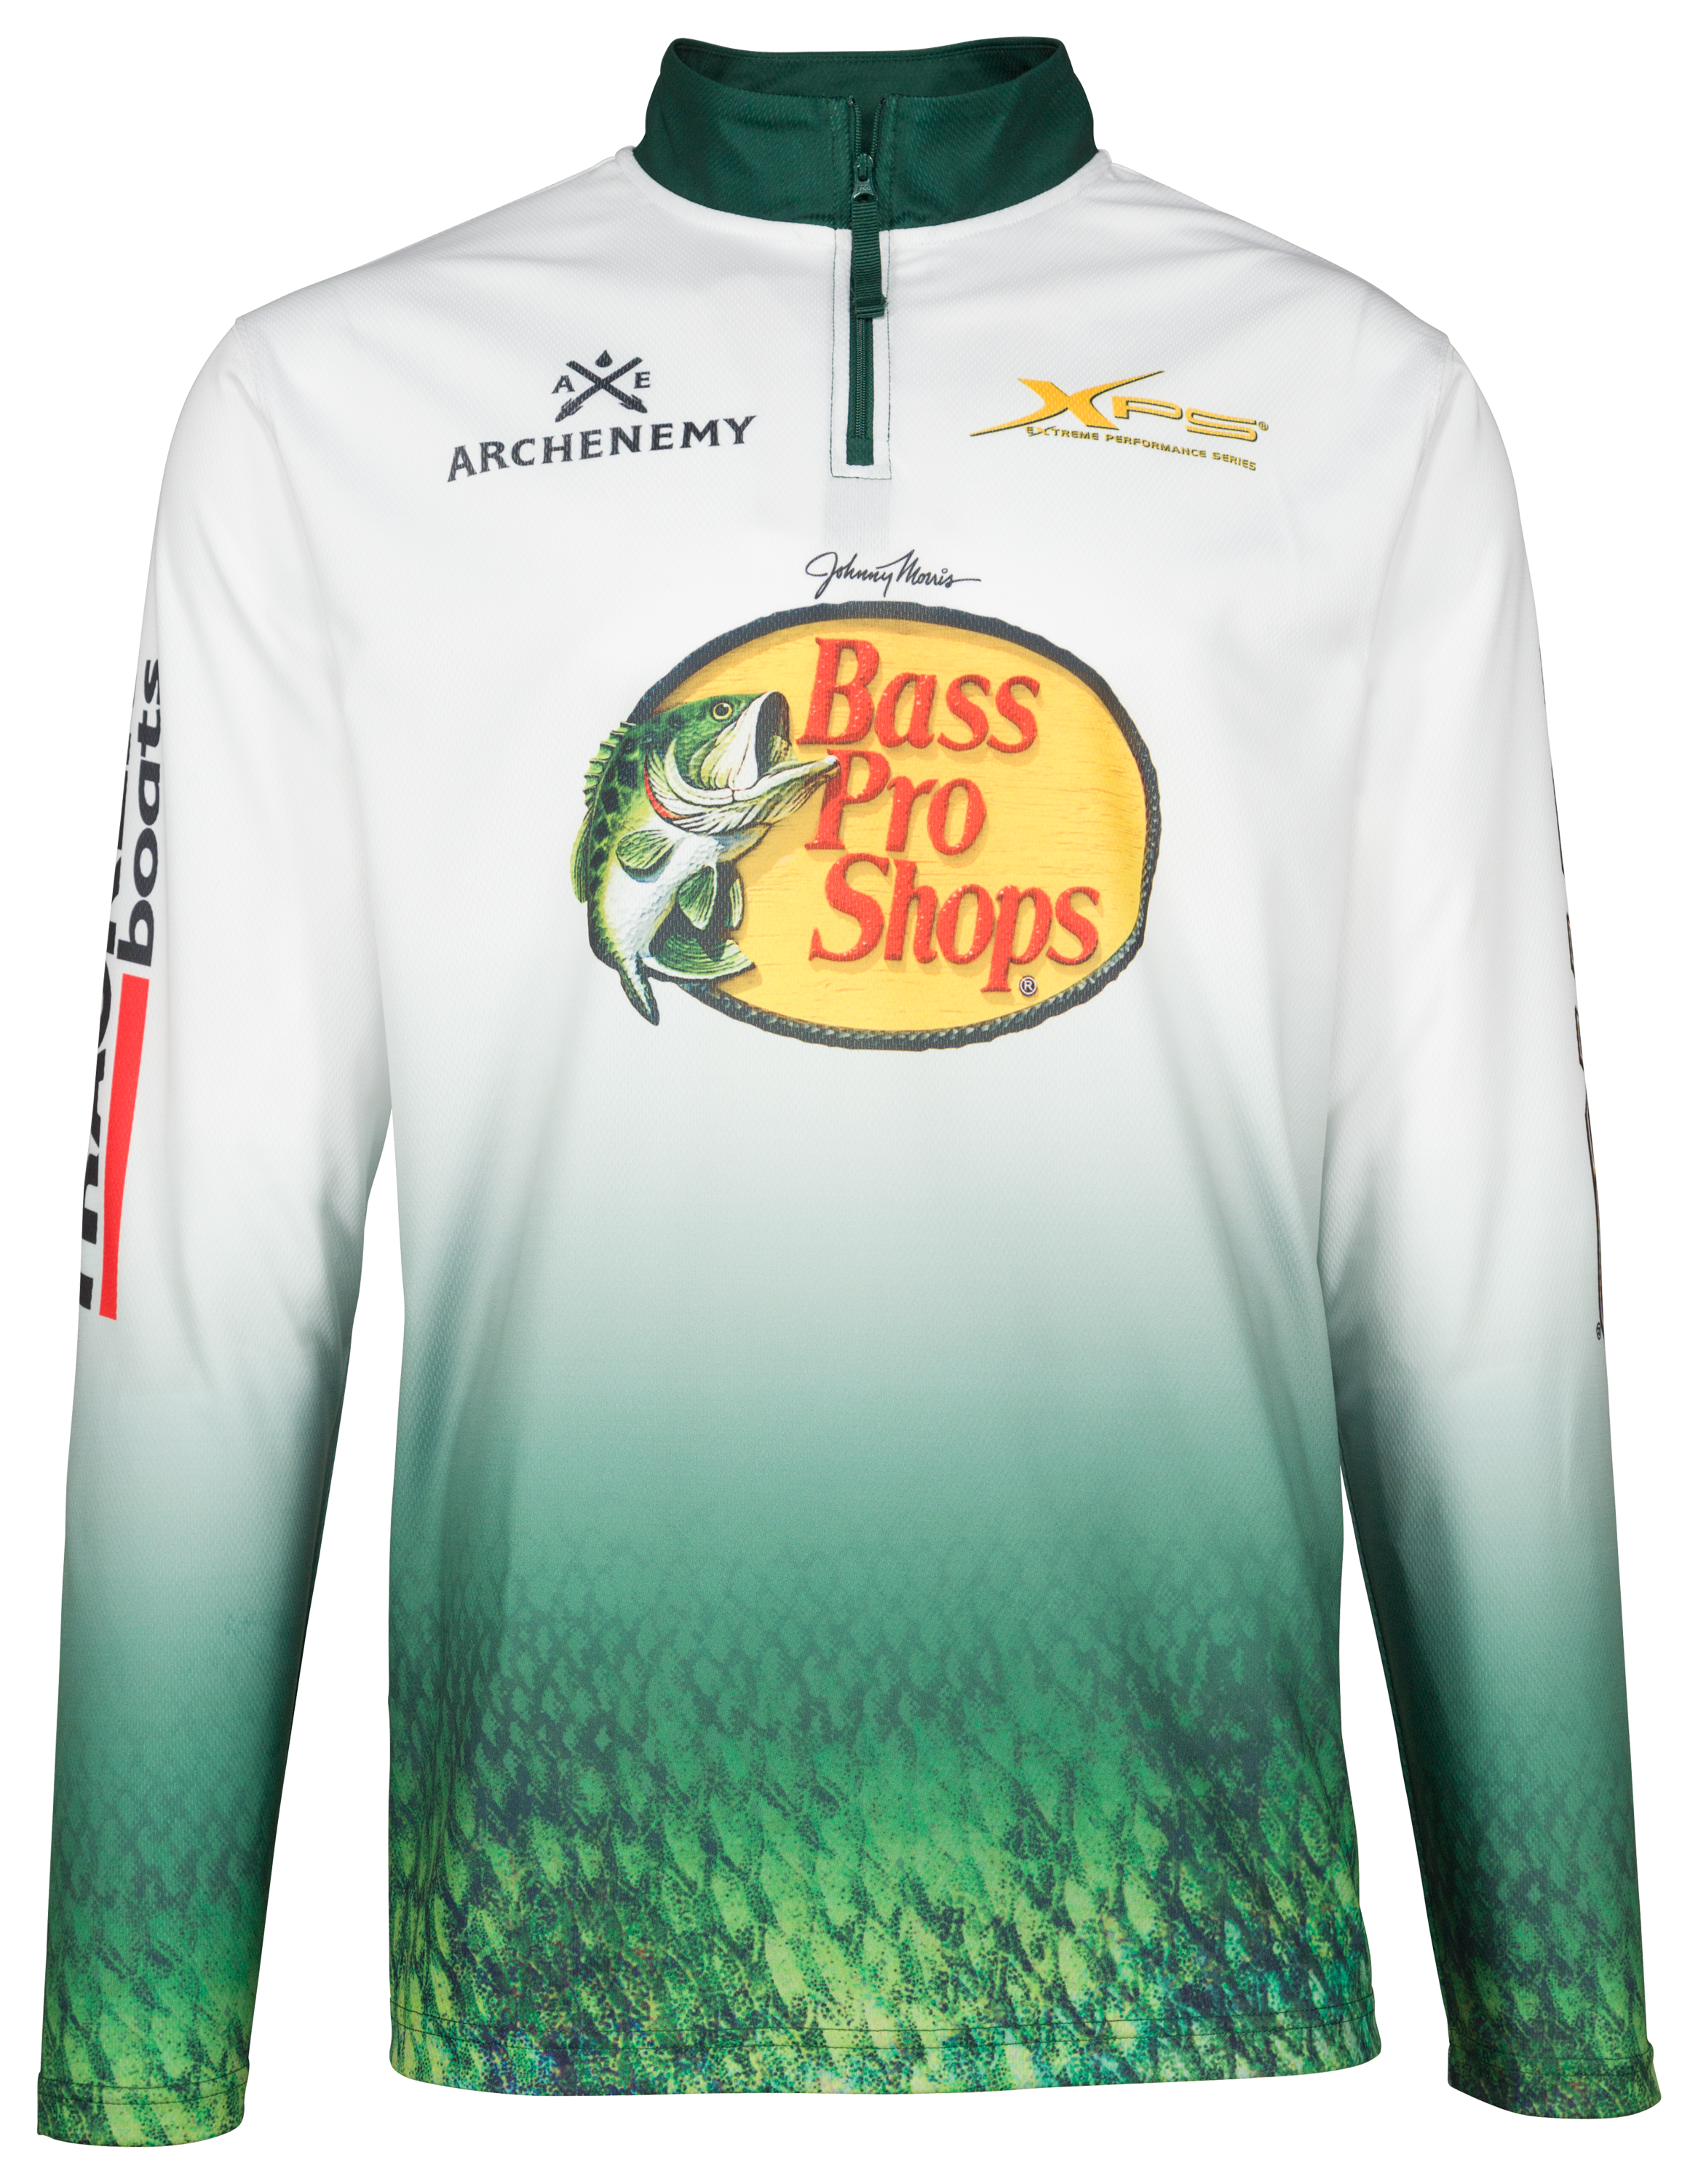 Fishing Tournament Jersey for sale